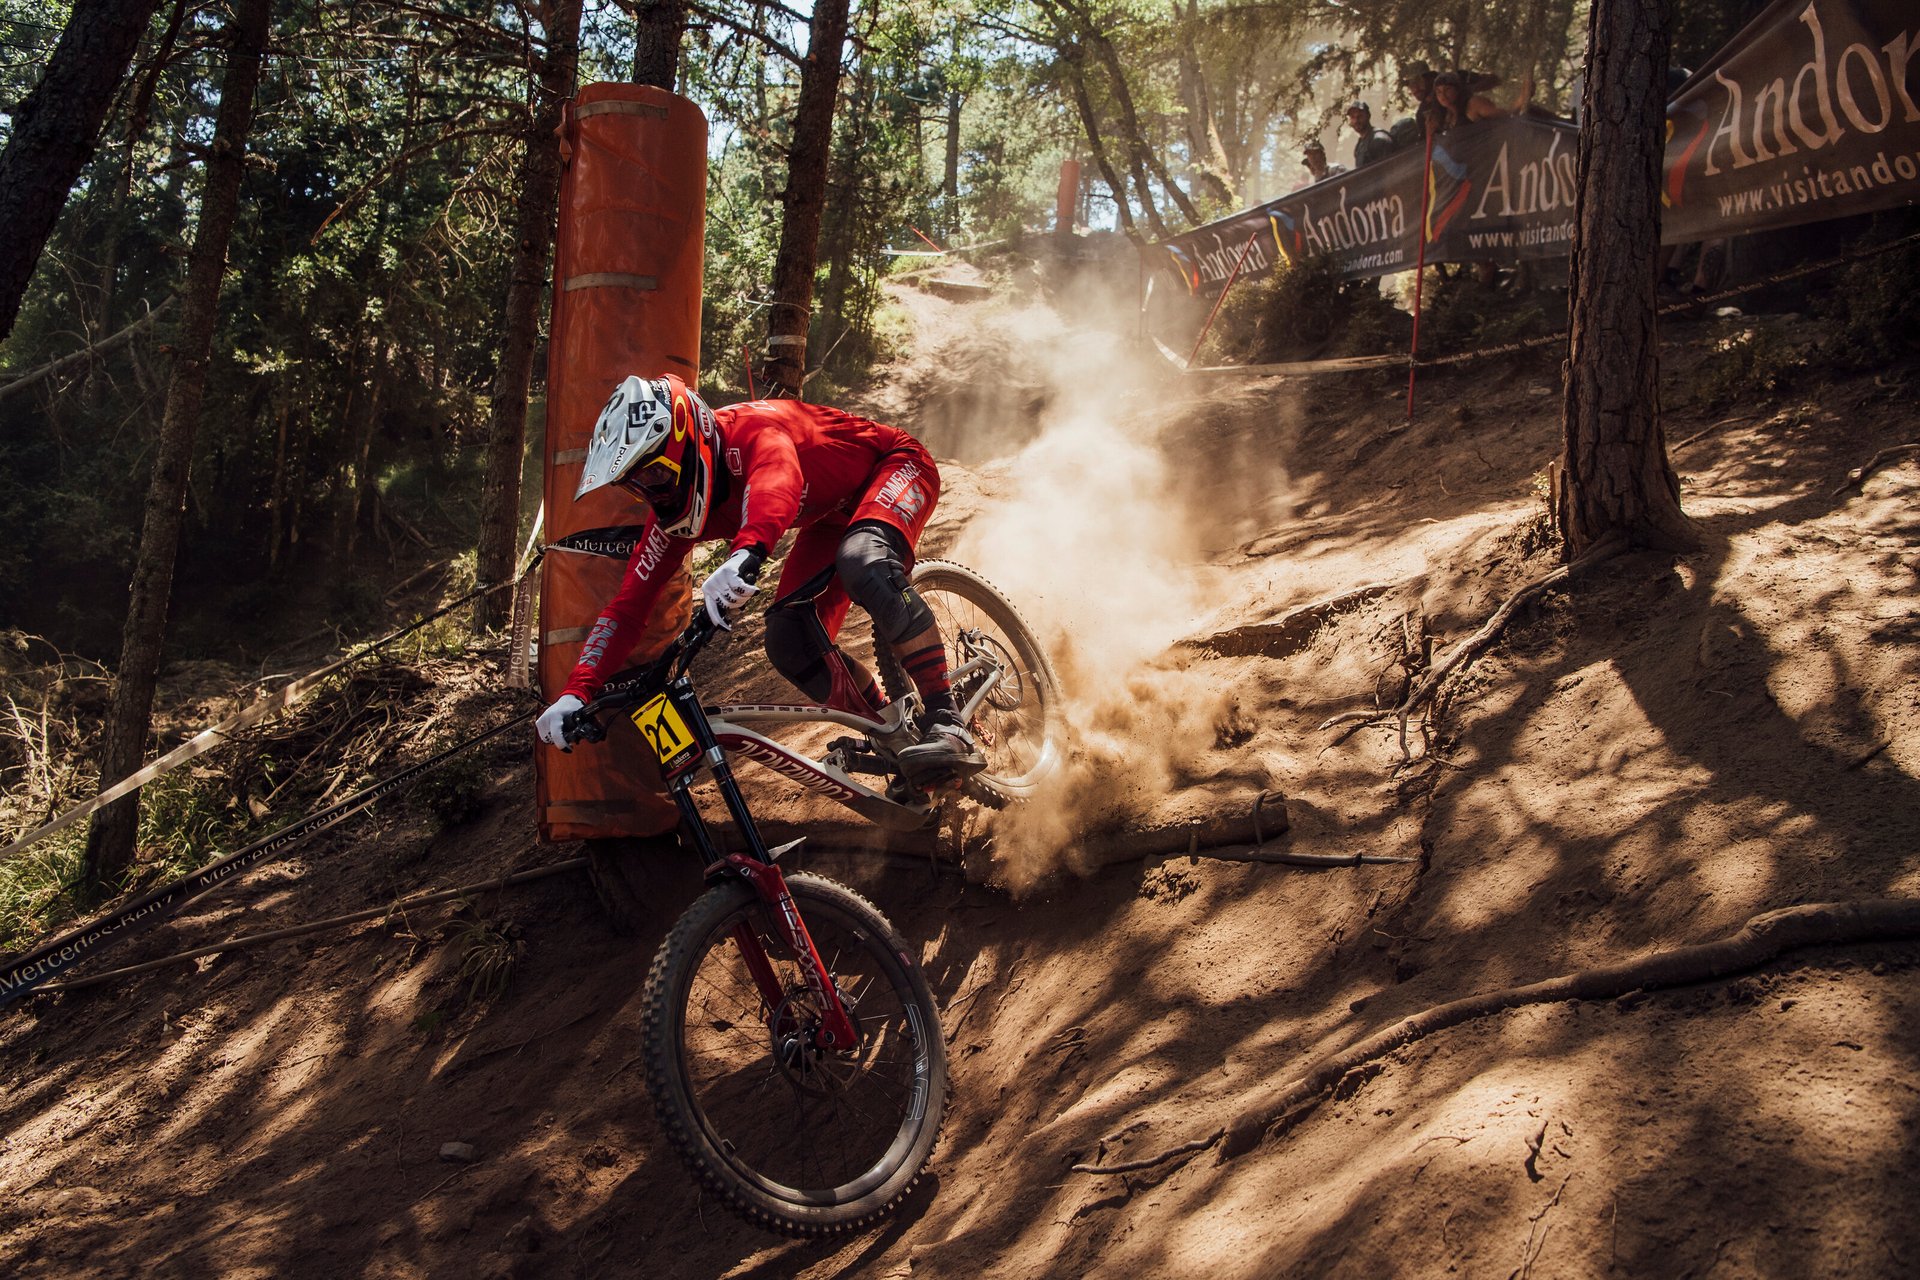 Remi Thirion shining on the Andorra DH World Cup track 2019